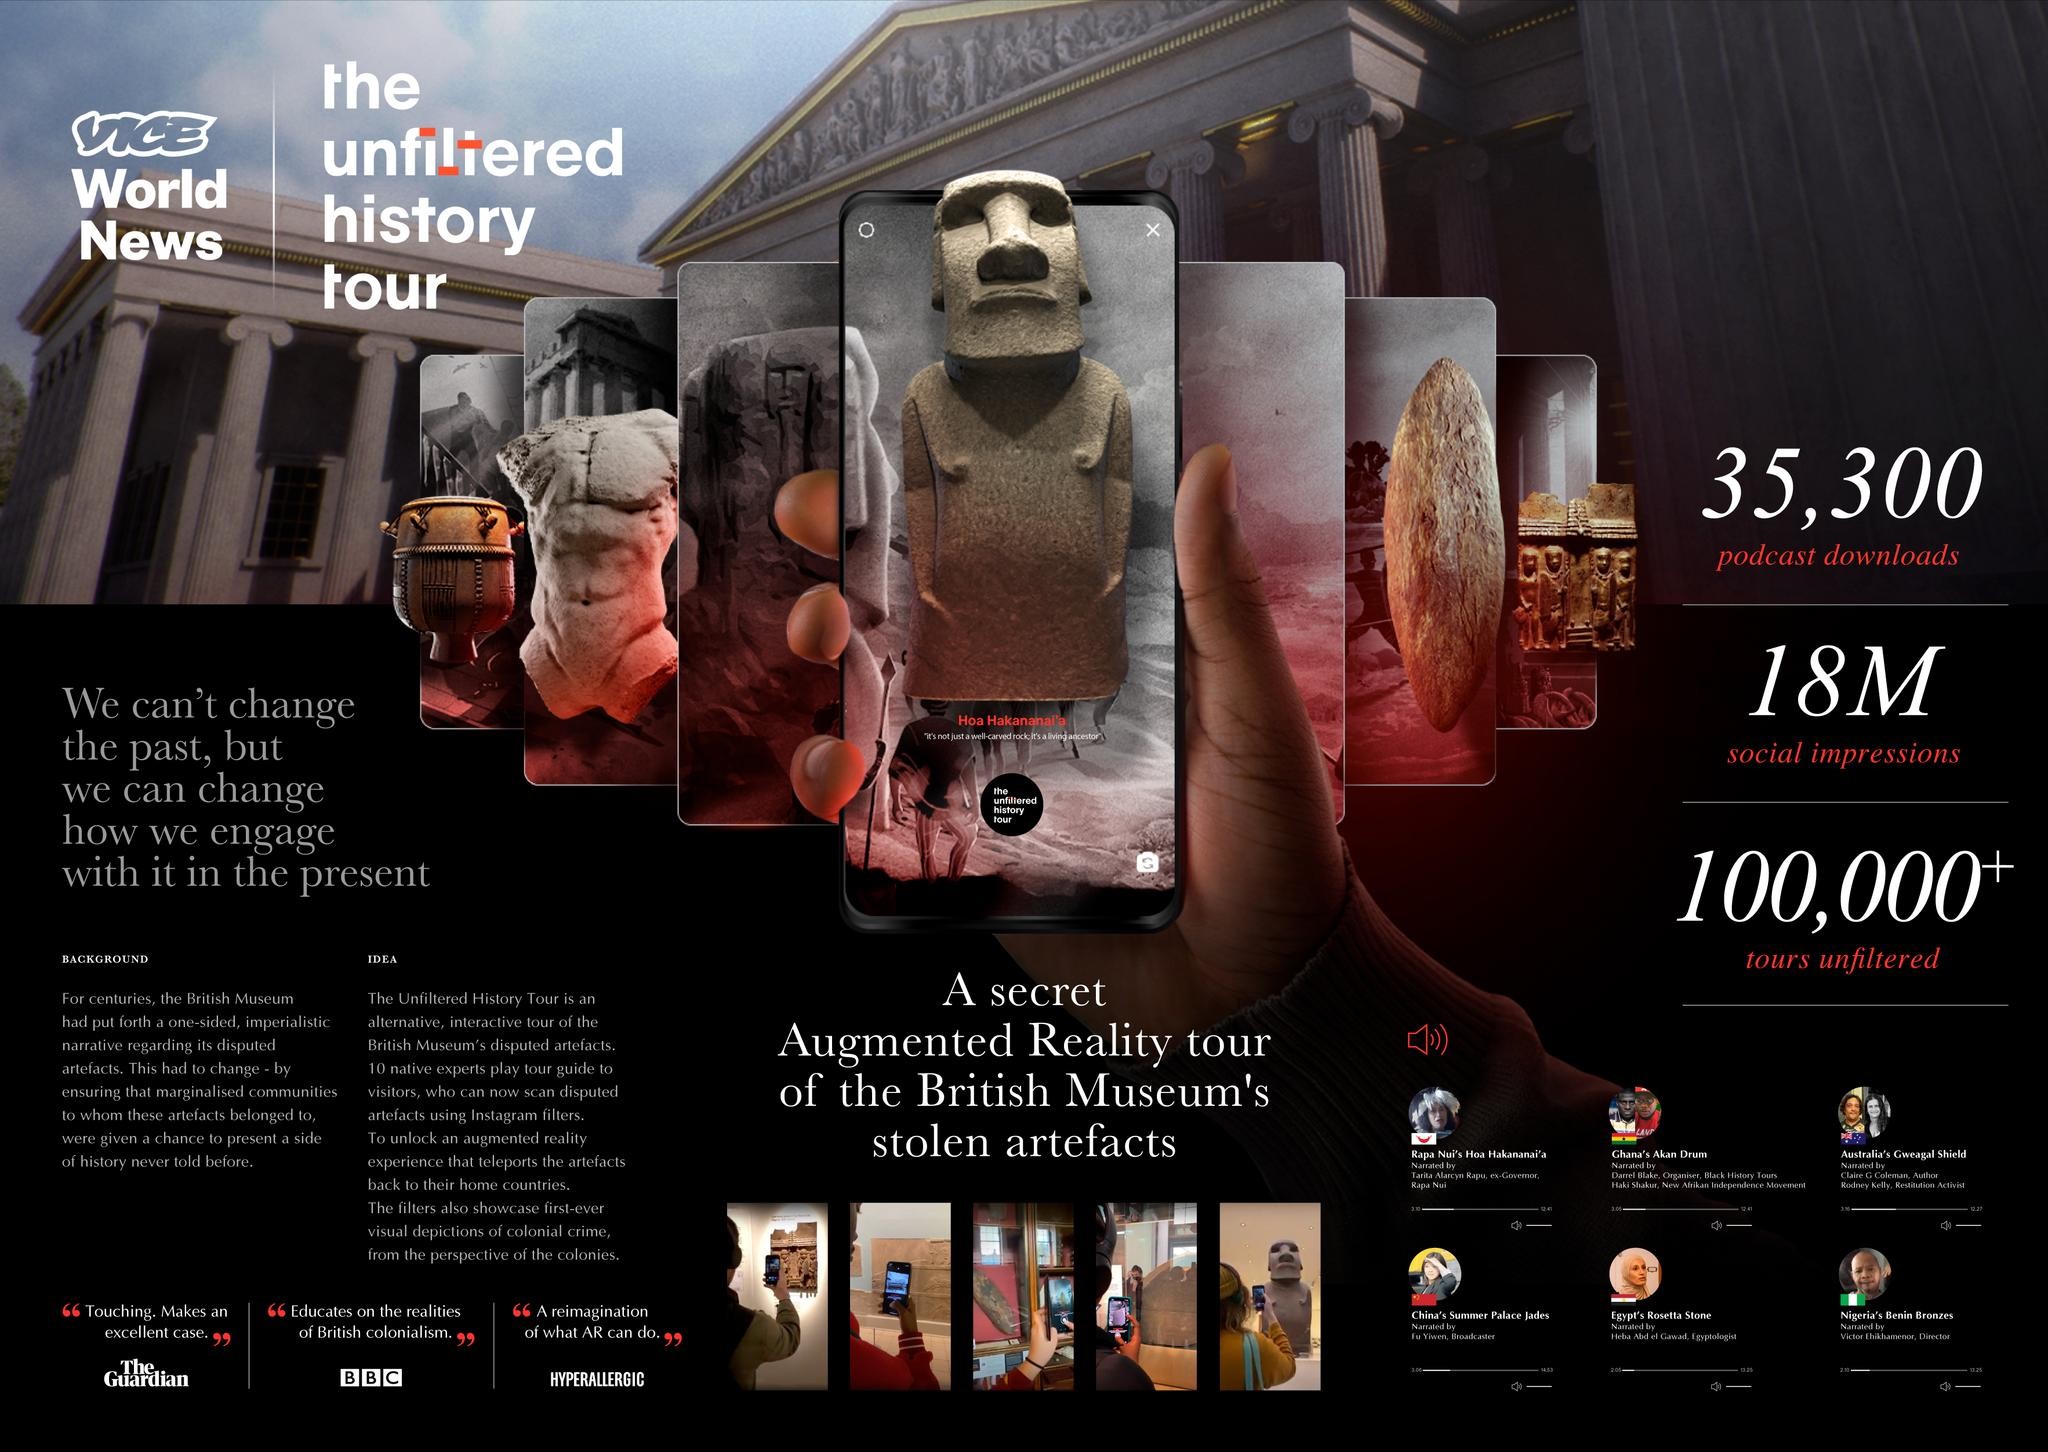 THE UNFILTERED HISTORY TOUR